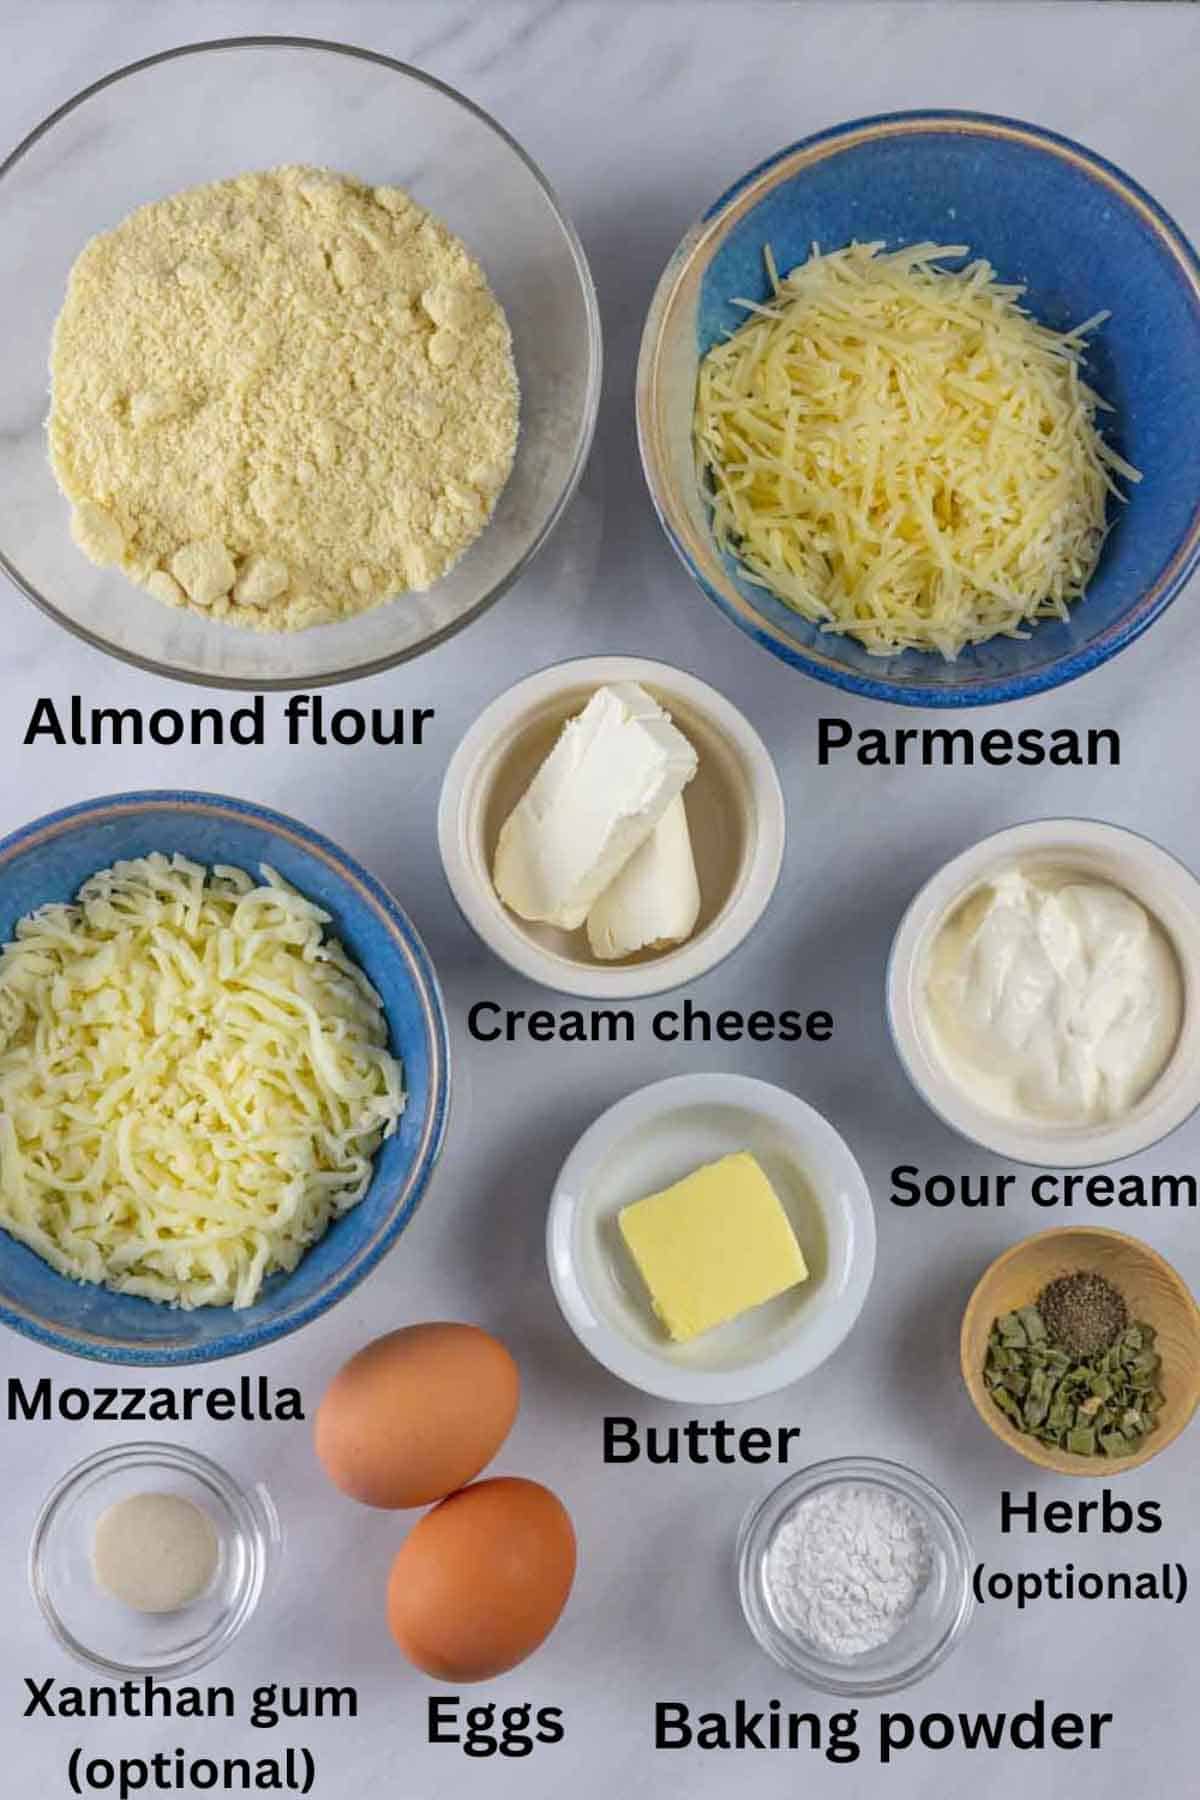 Ingredients for gluten-free dinner rolls in bowls with black text labels under each.